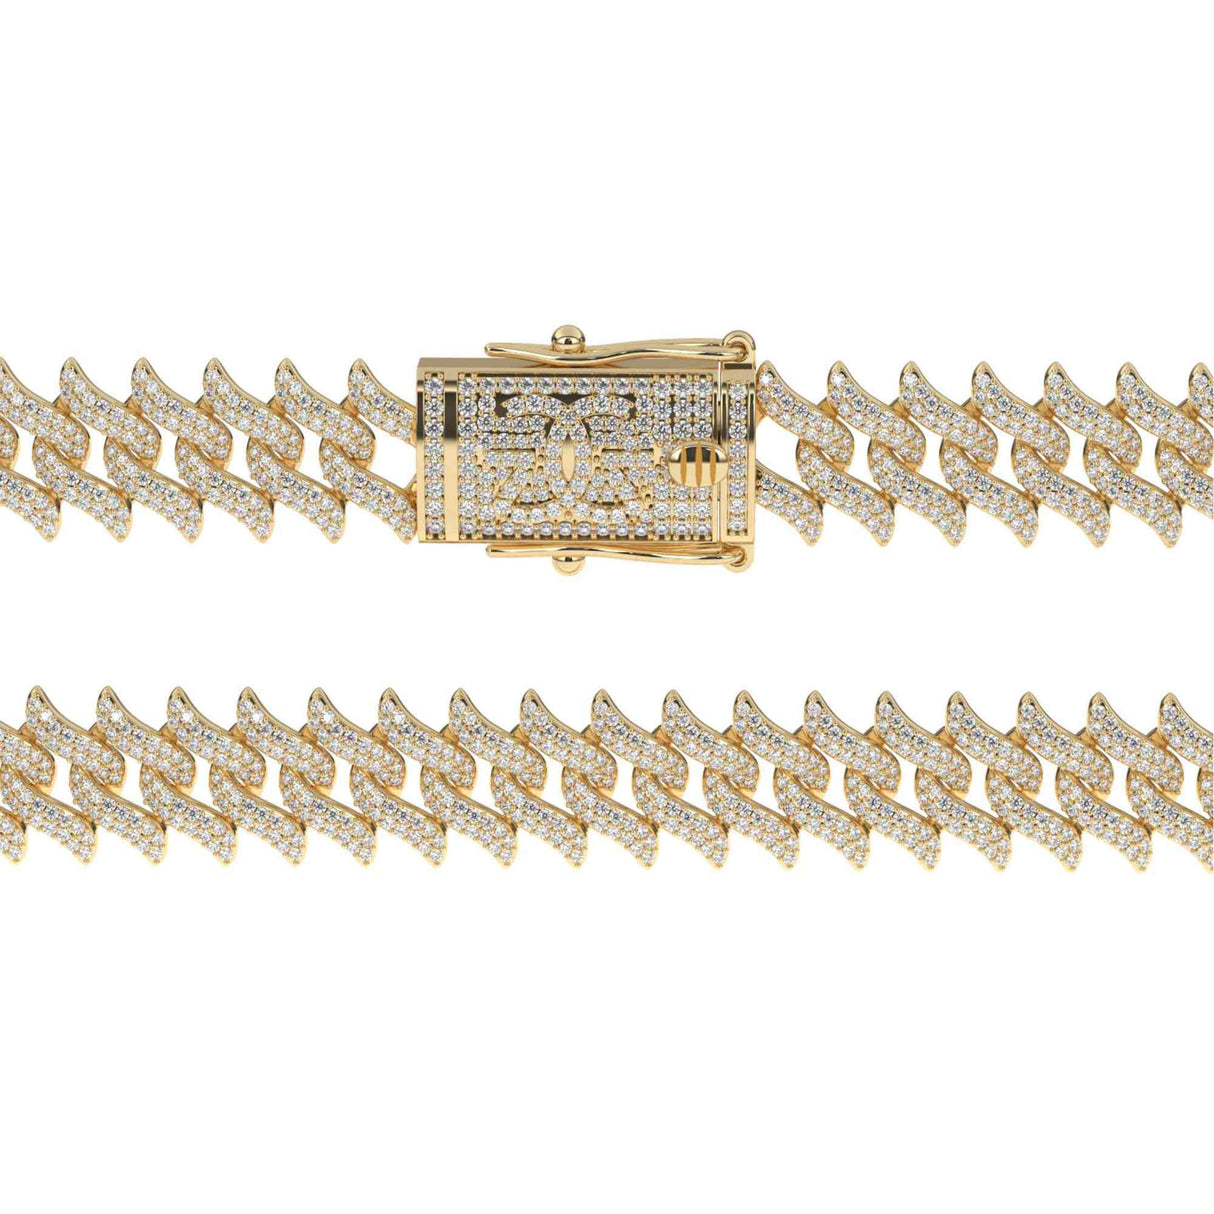 DIAMOND-SPIKED-LAUREL-CUBAN-LINK-CHAIN-18k-gold-plated-lock-view-the-gold-gods-mens-jewelry